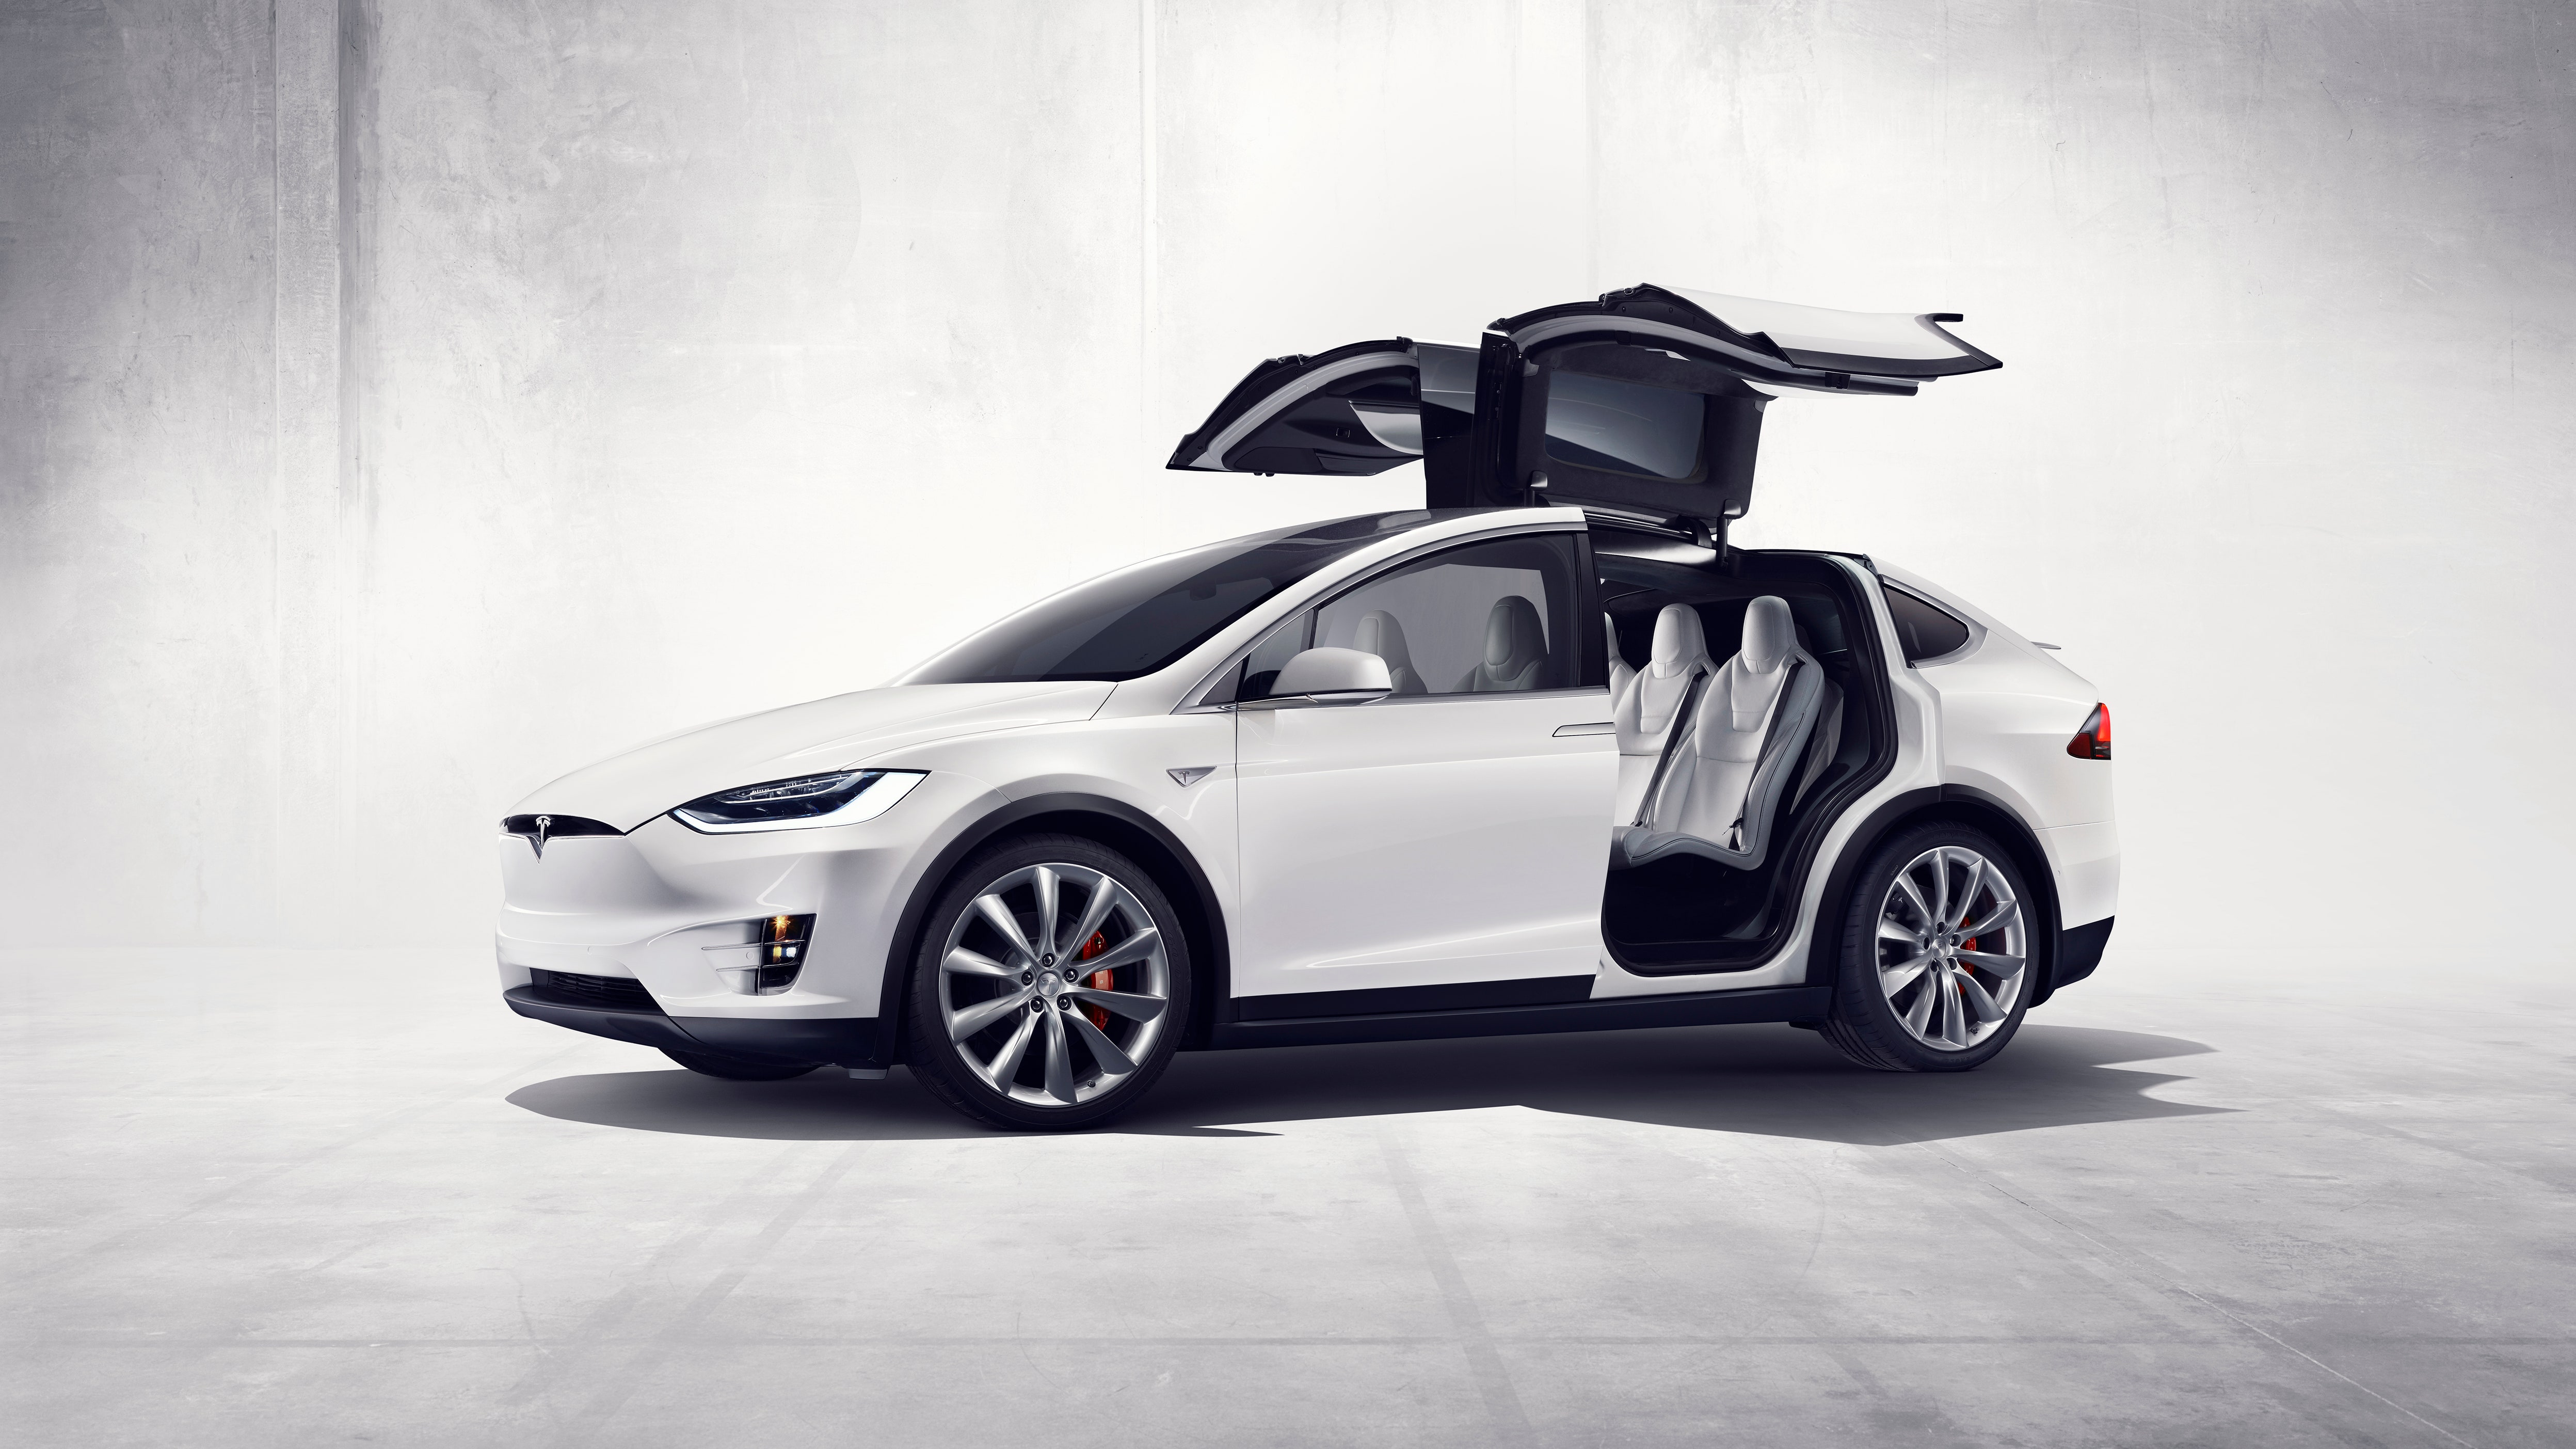 Tesla unveils Model X, the world's first luxury electric SUV |  Architectural Digest